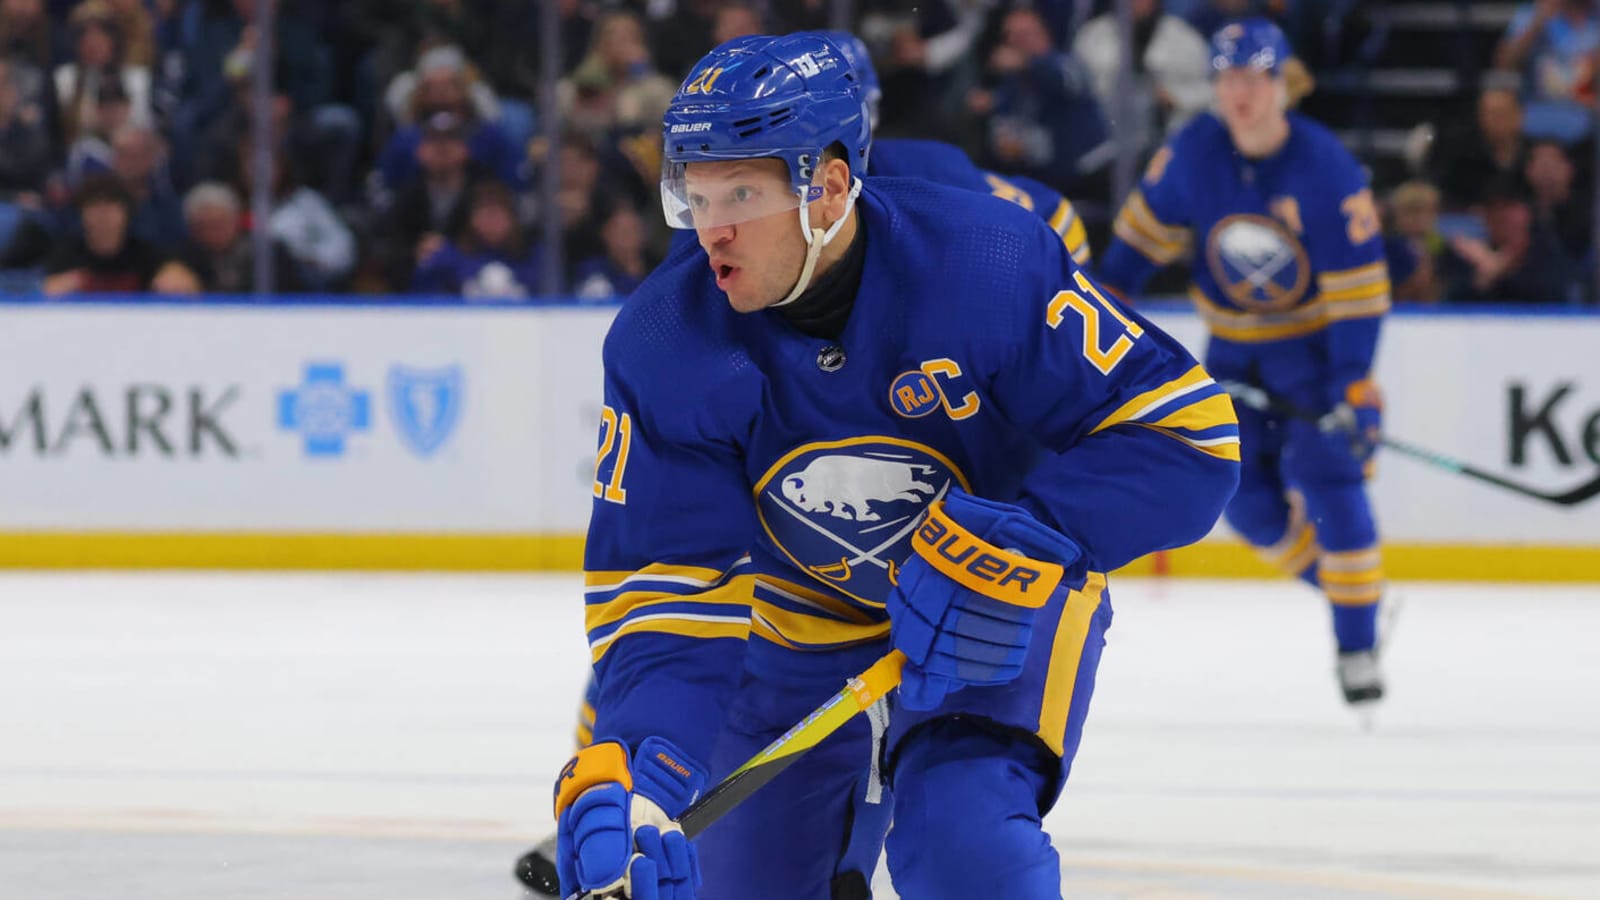 Should Sabres Trade Okposo and Girgensons?